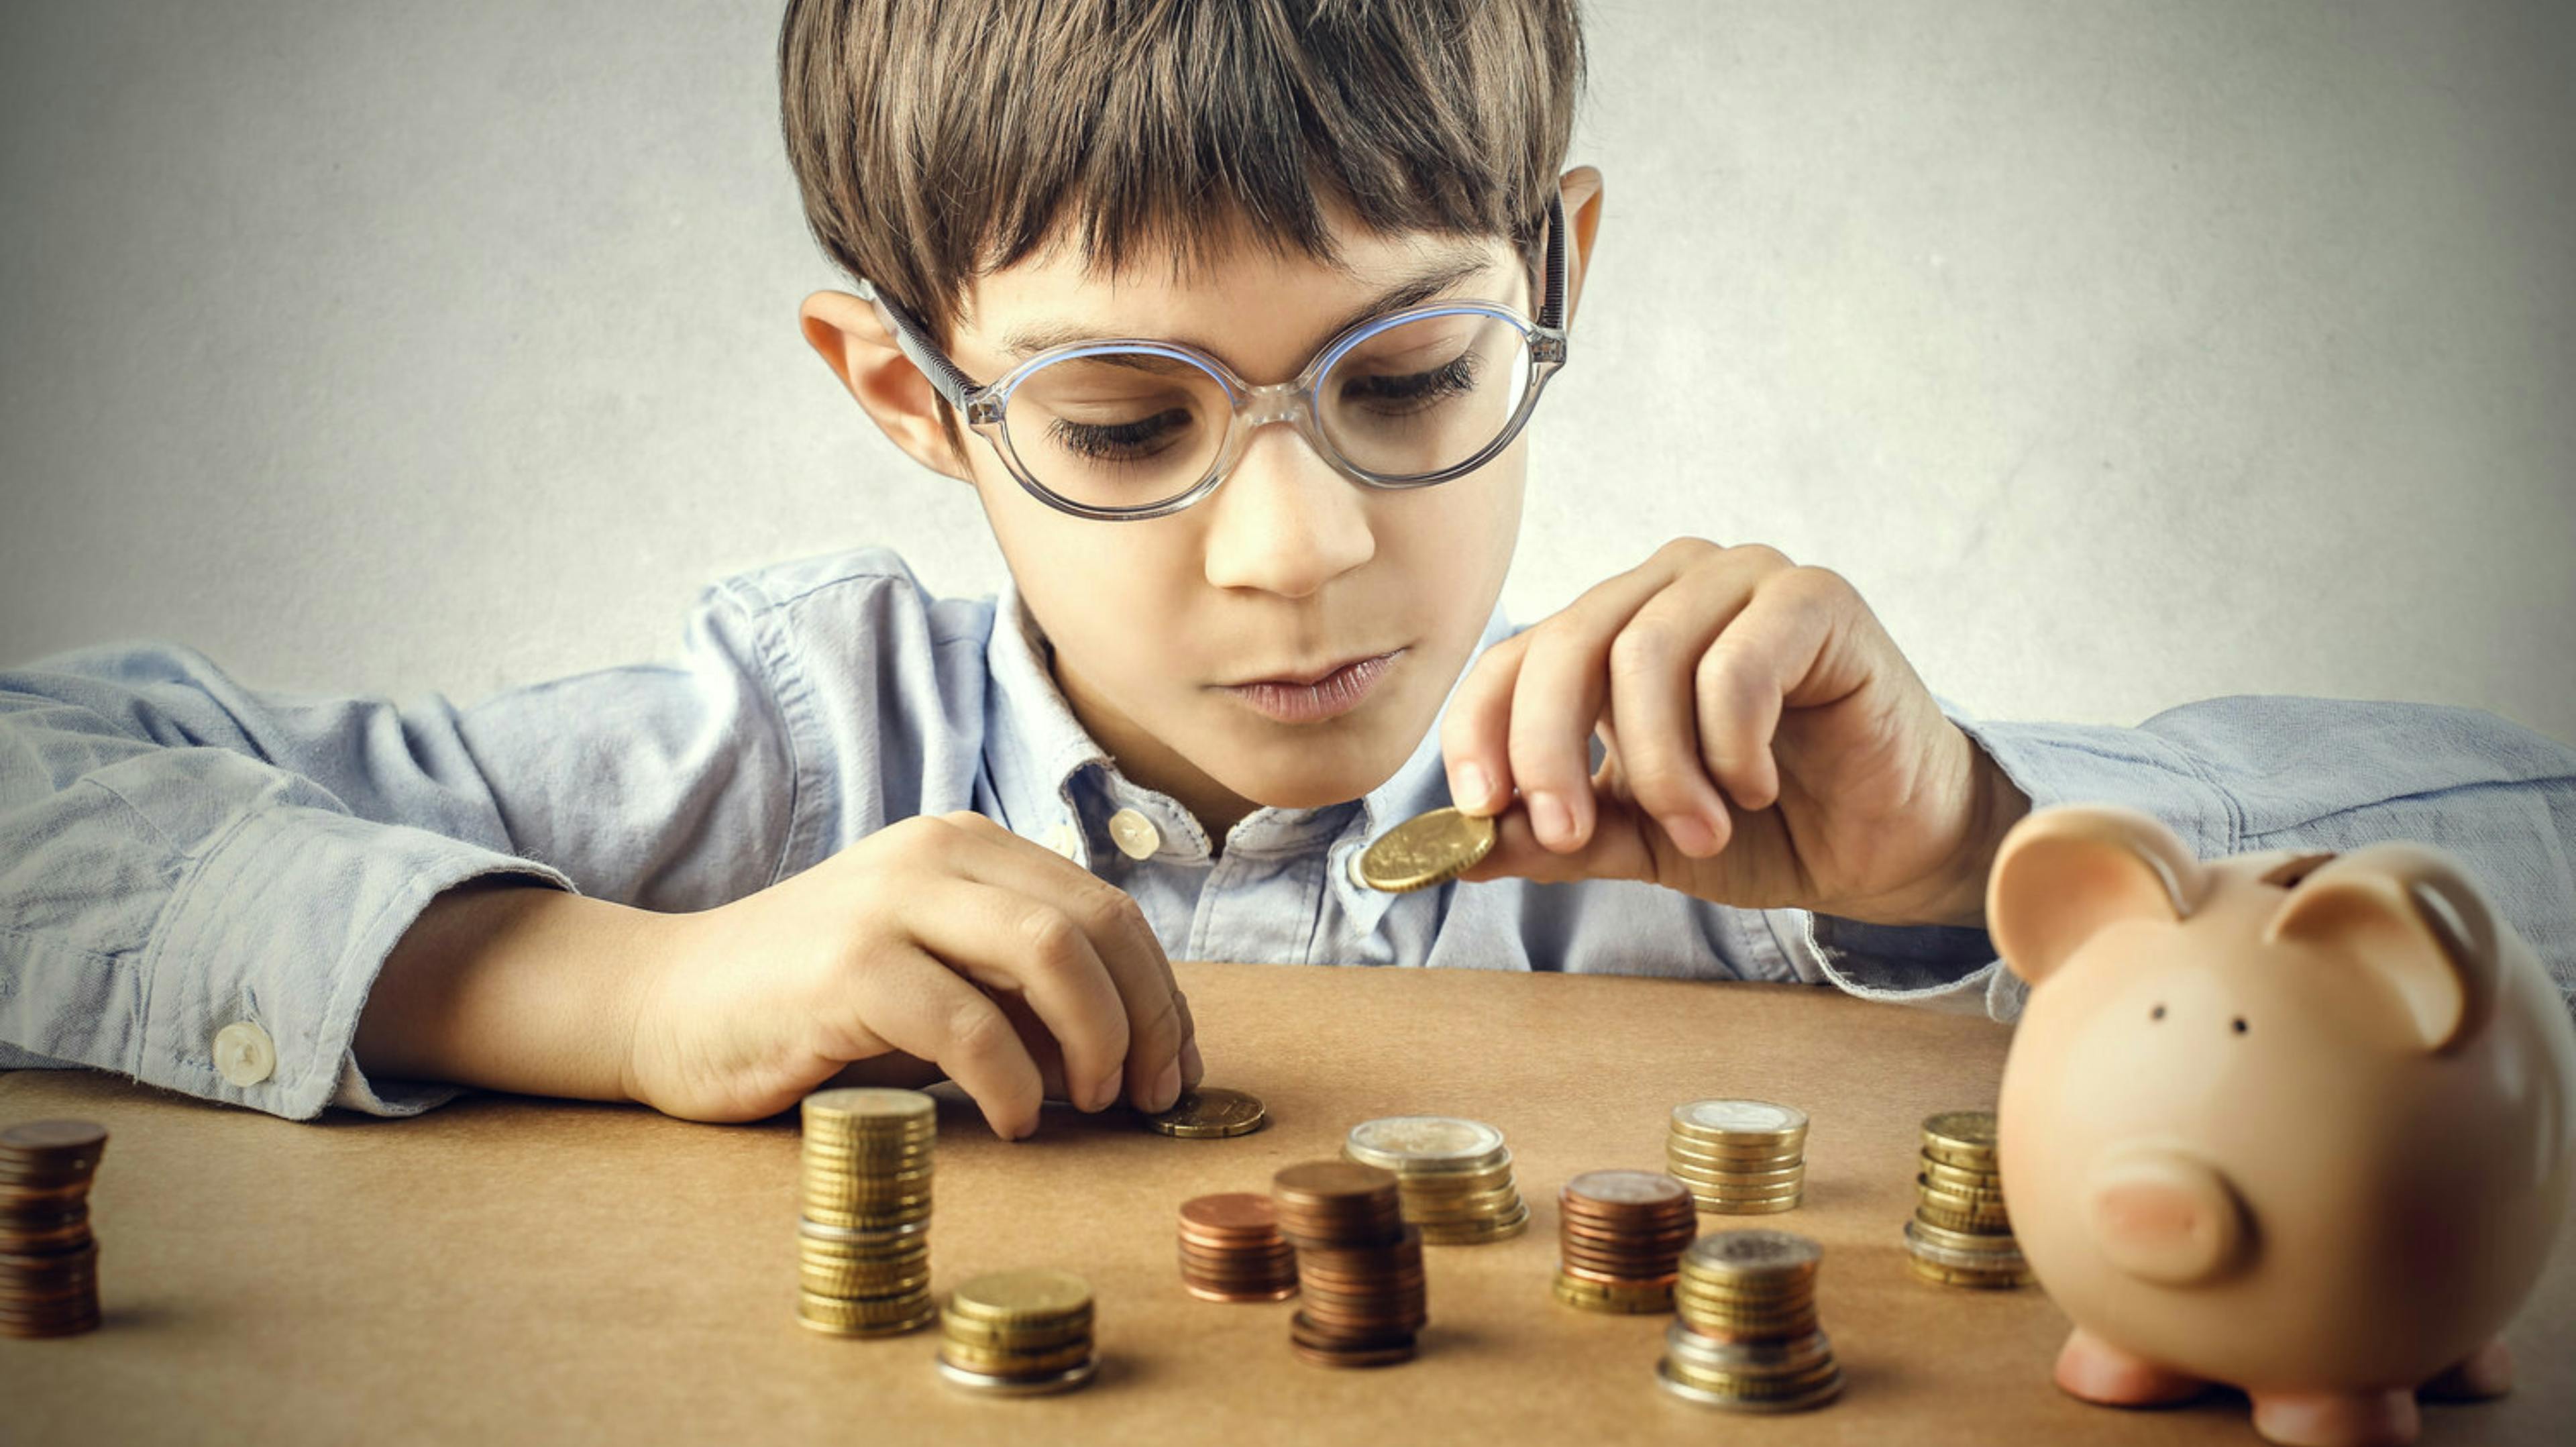 NZ Schools To Teach Kids How To Be Financially Capable